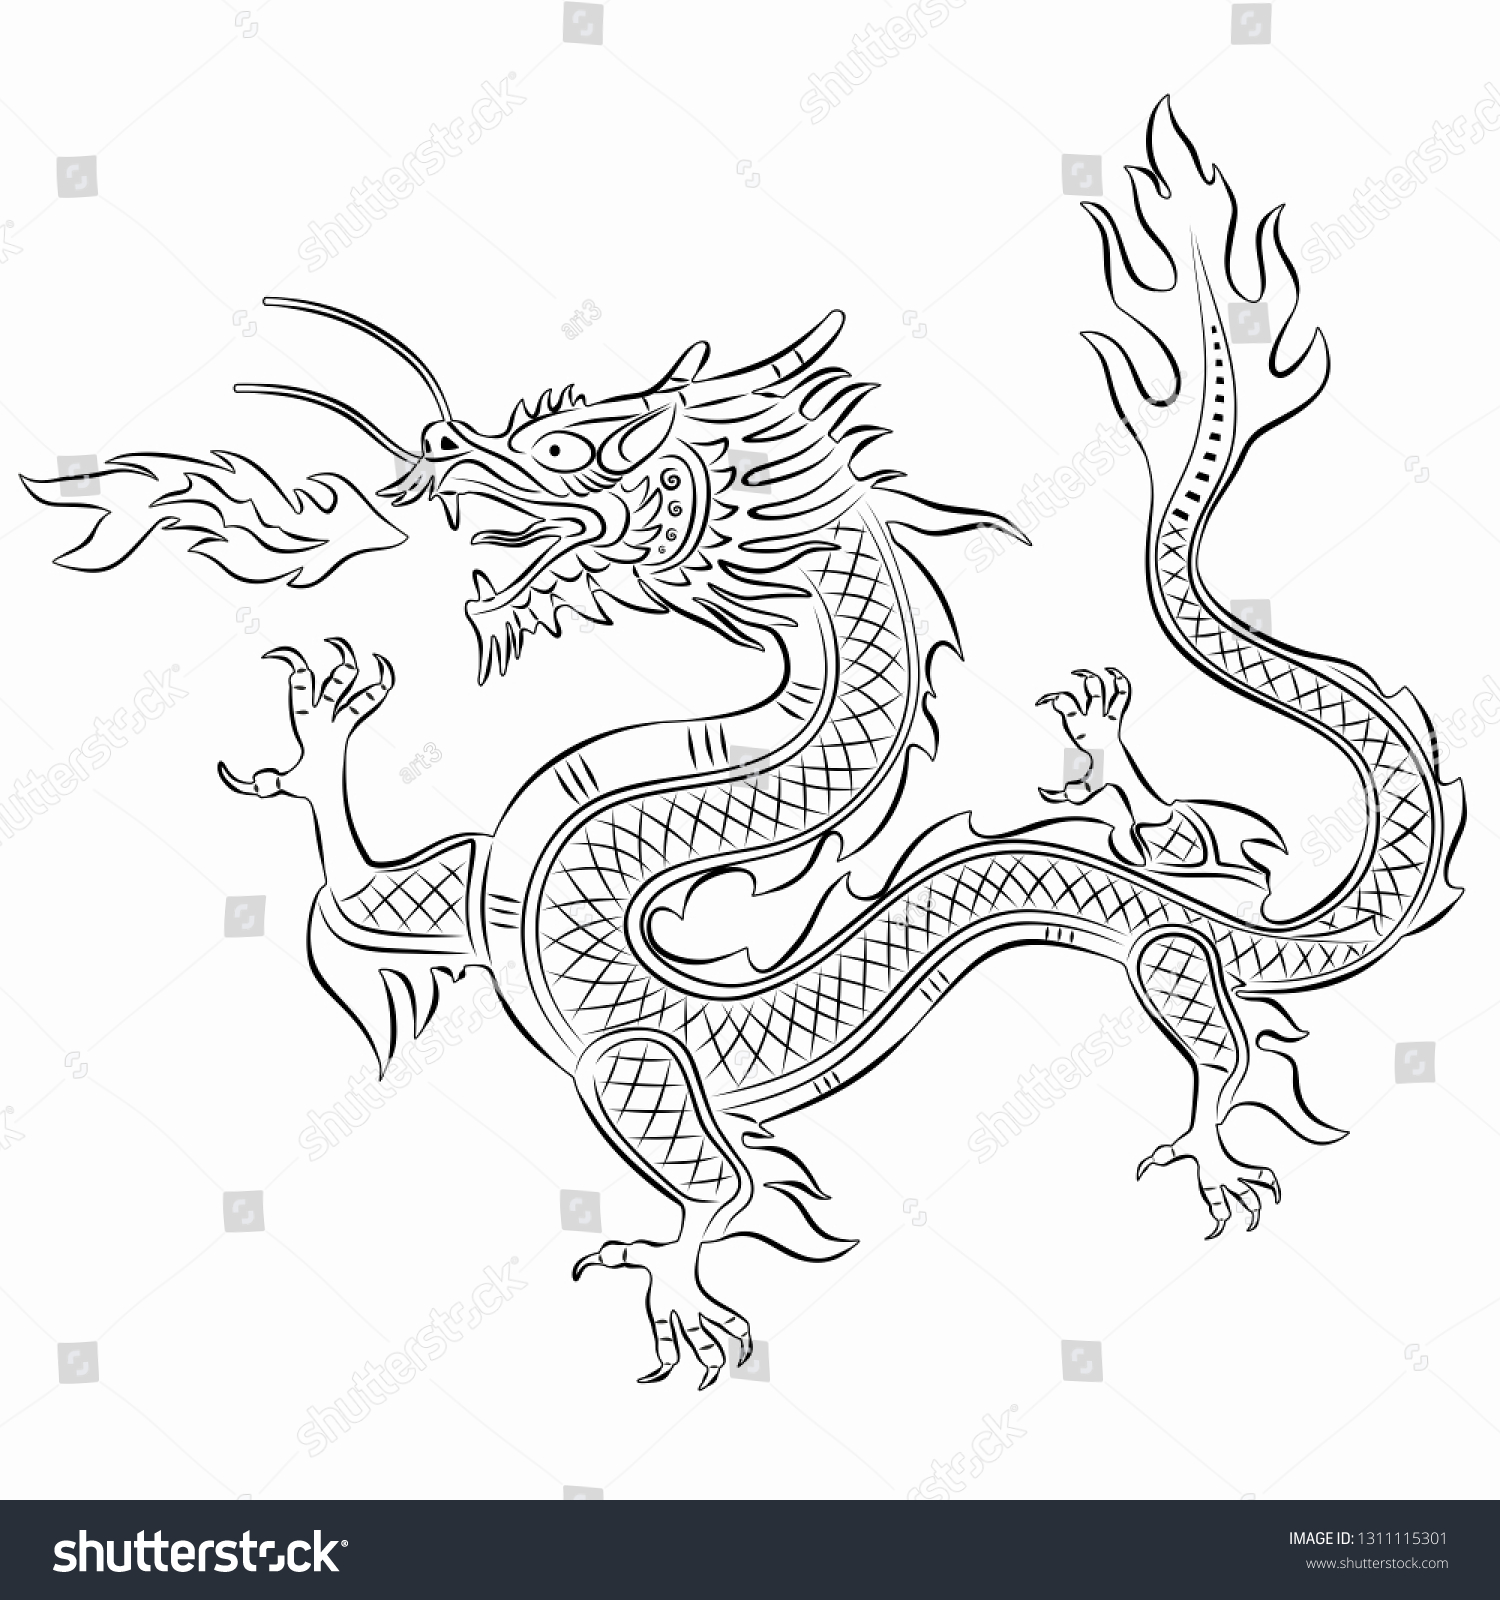 Isolated Illustration Chinese Dragon Black White Stock Vector Royalty Free 1311115301